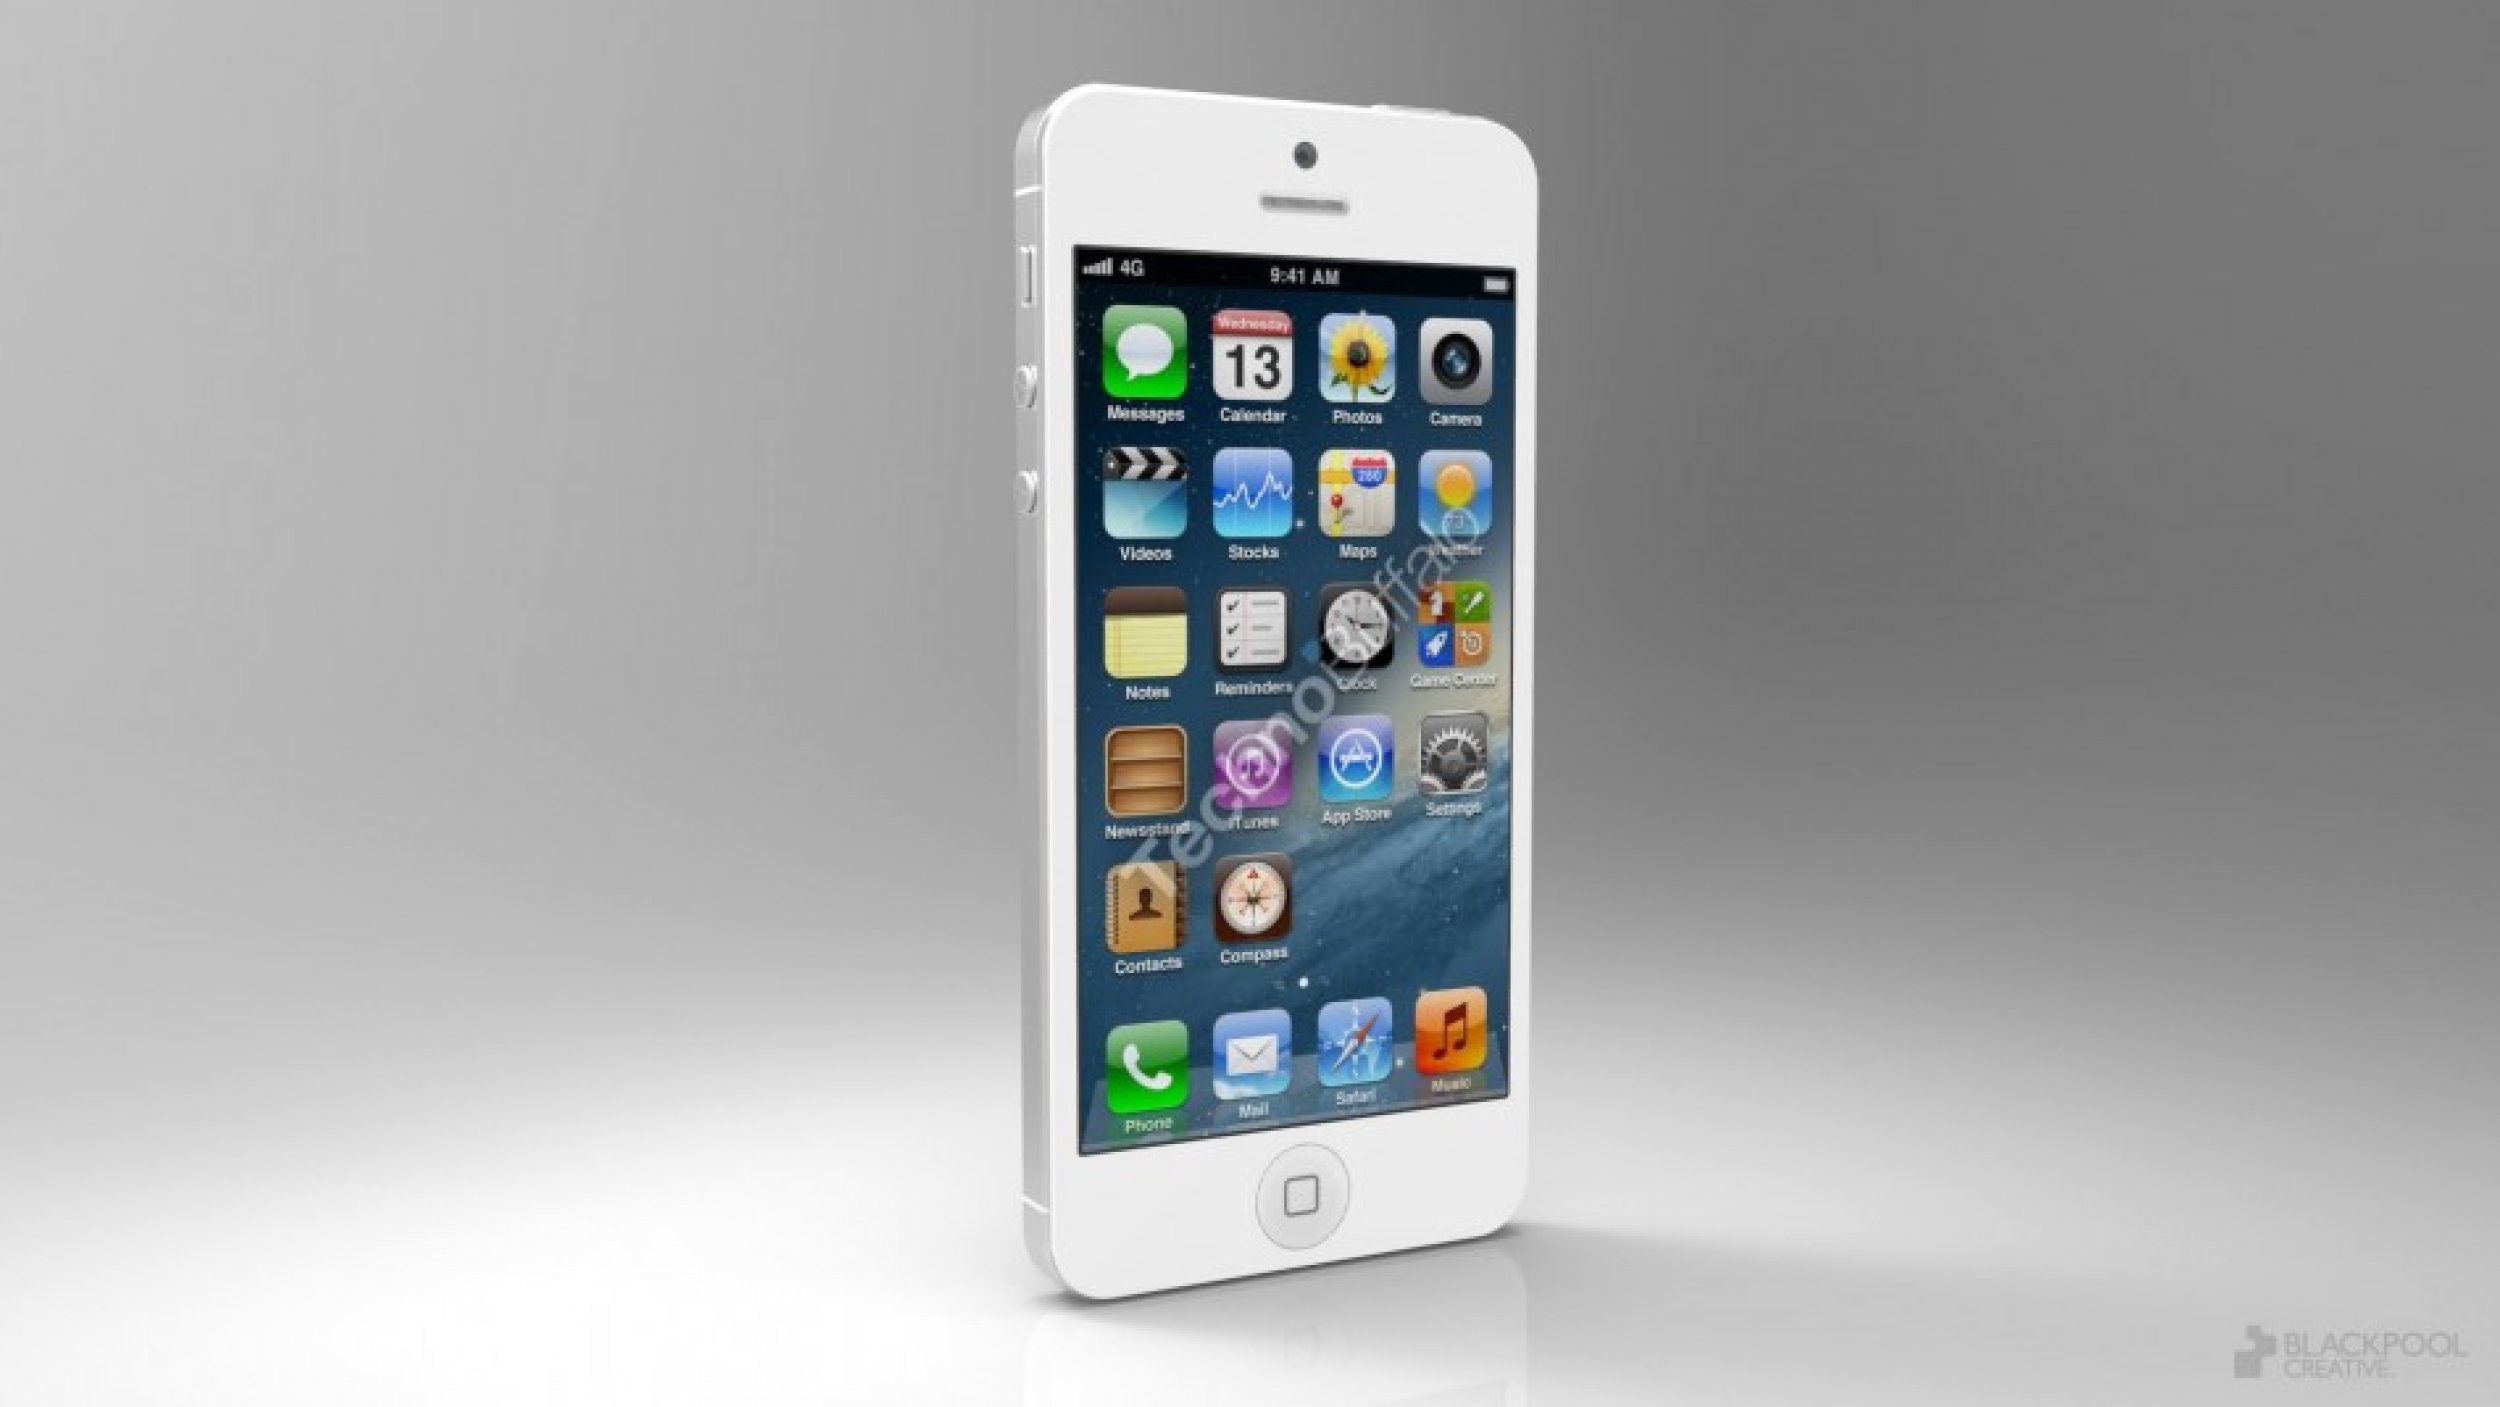 High Resolution 3D Renderings of Next iPhone Based on Leaked Parts Make Rumors Alive